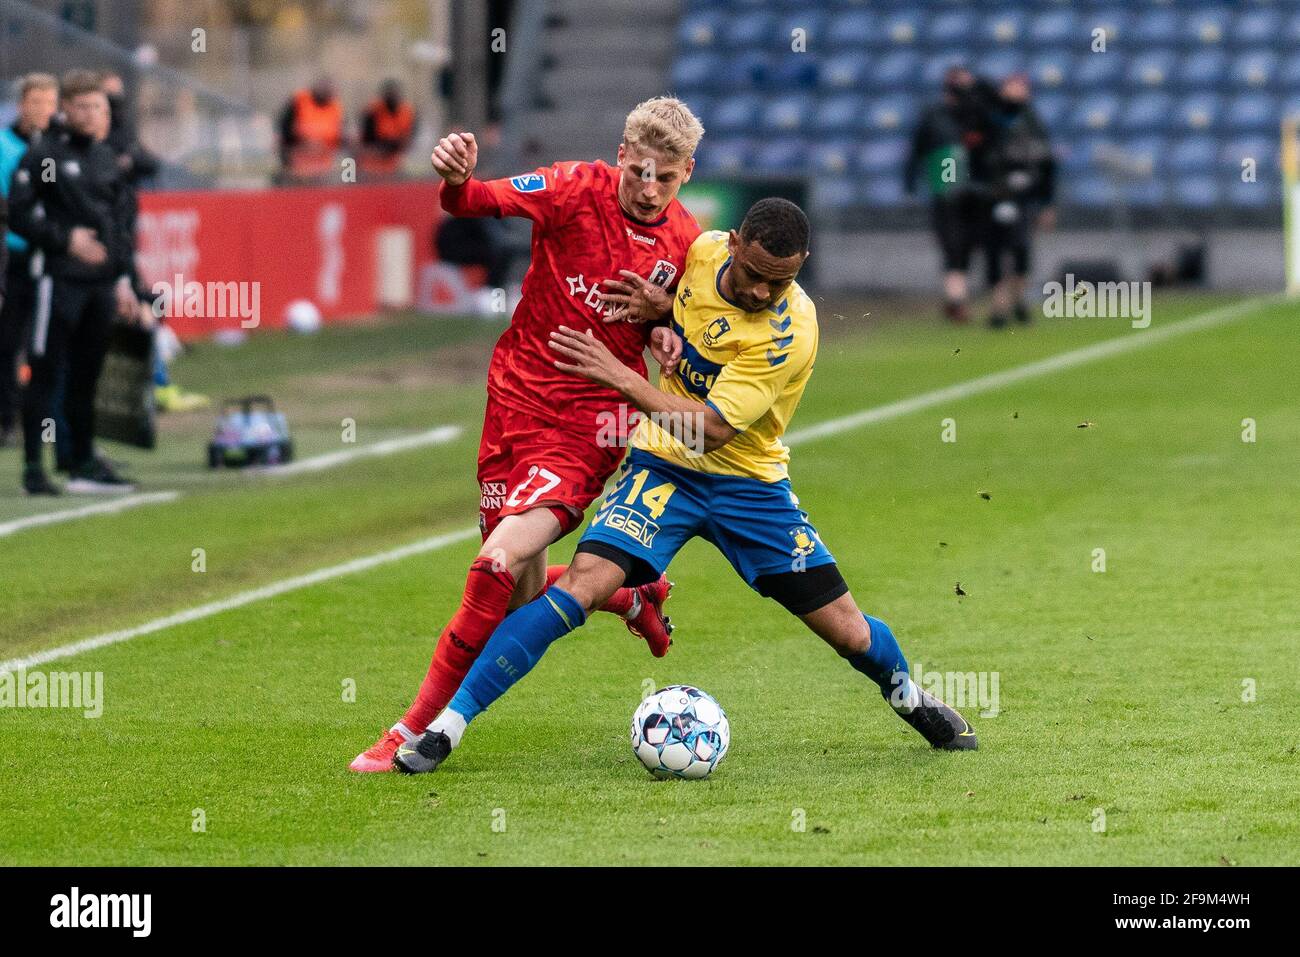 Brondby, Denmark. 18th Apr, 2021. Albert Gronbaek (27) of Aarhus GF and Kevin Mensah (14) of Brondby IF seen during the 3F Superliga match between FC Brondby IF and Aarhus GF Brondby Stadion in Brondby. (Photo Credit: Gonzales Photo/Alamy Live News Stock Photo